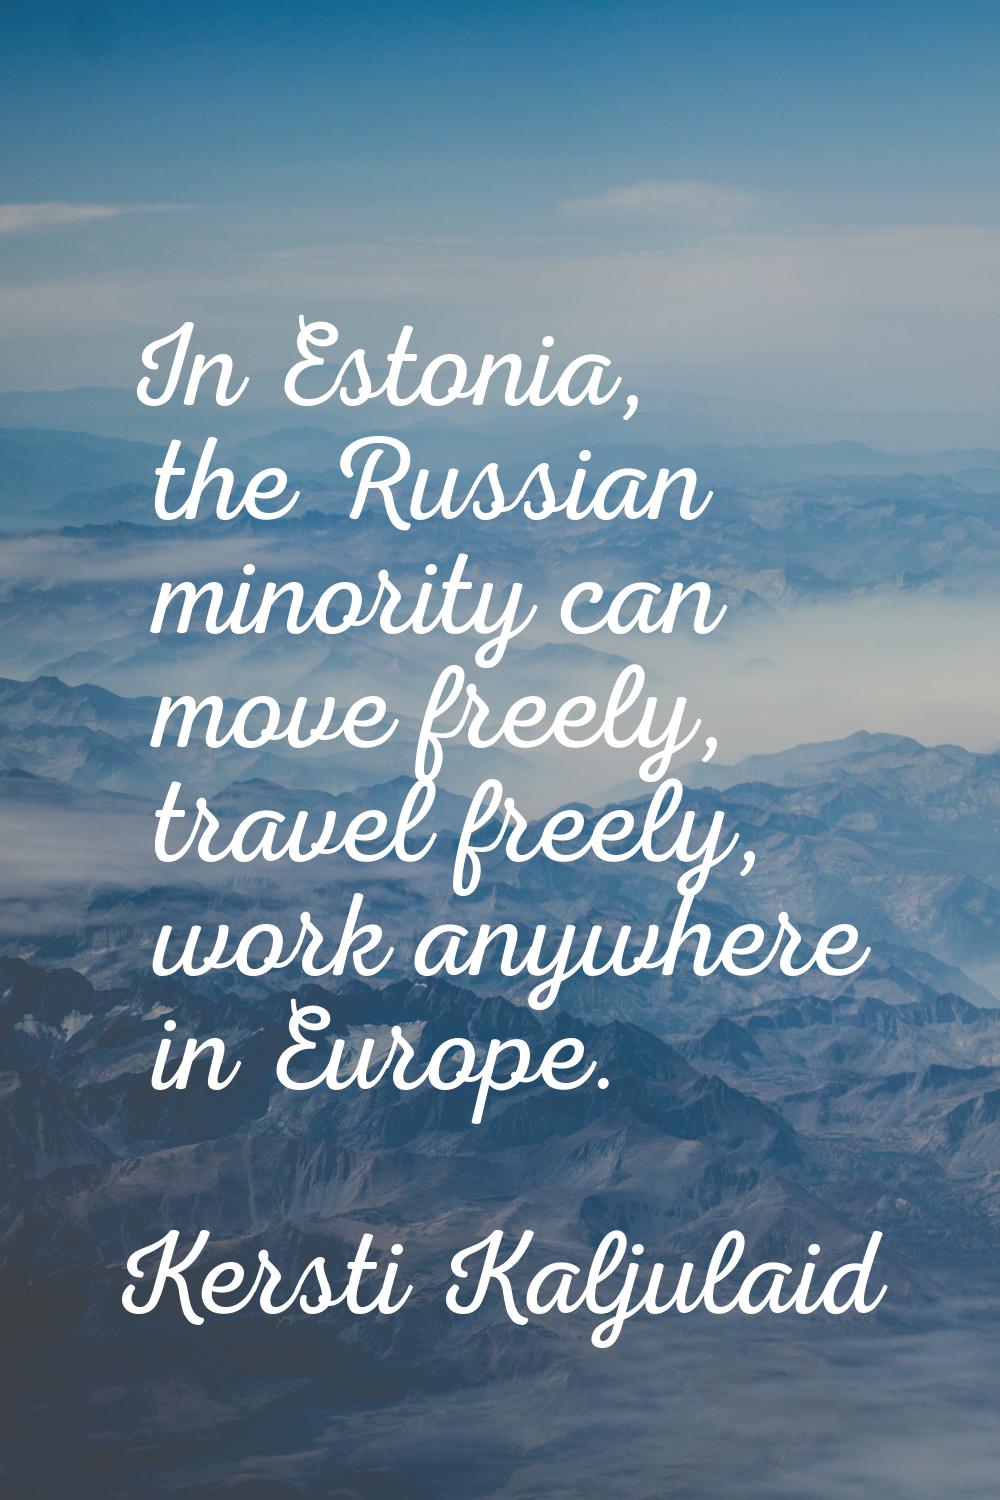 In Estonia, the Russian minority can move freely, travel freely, work anywhere in Europe.